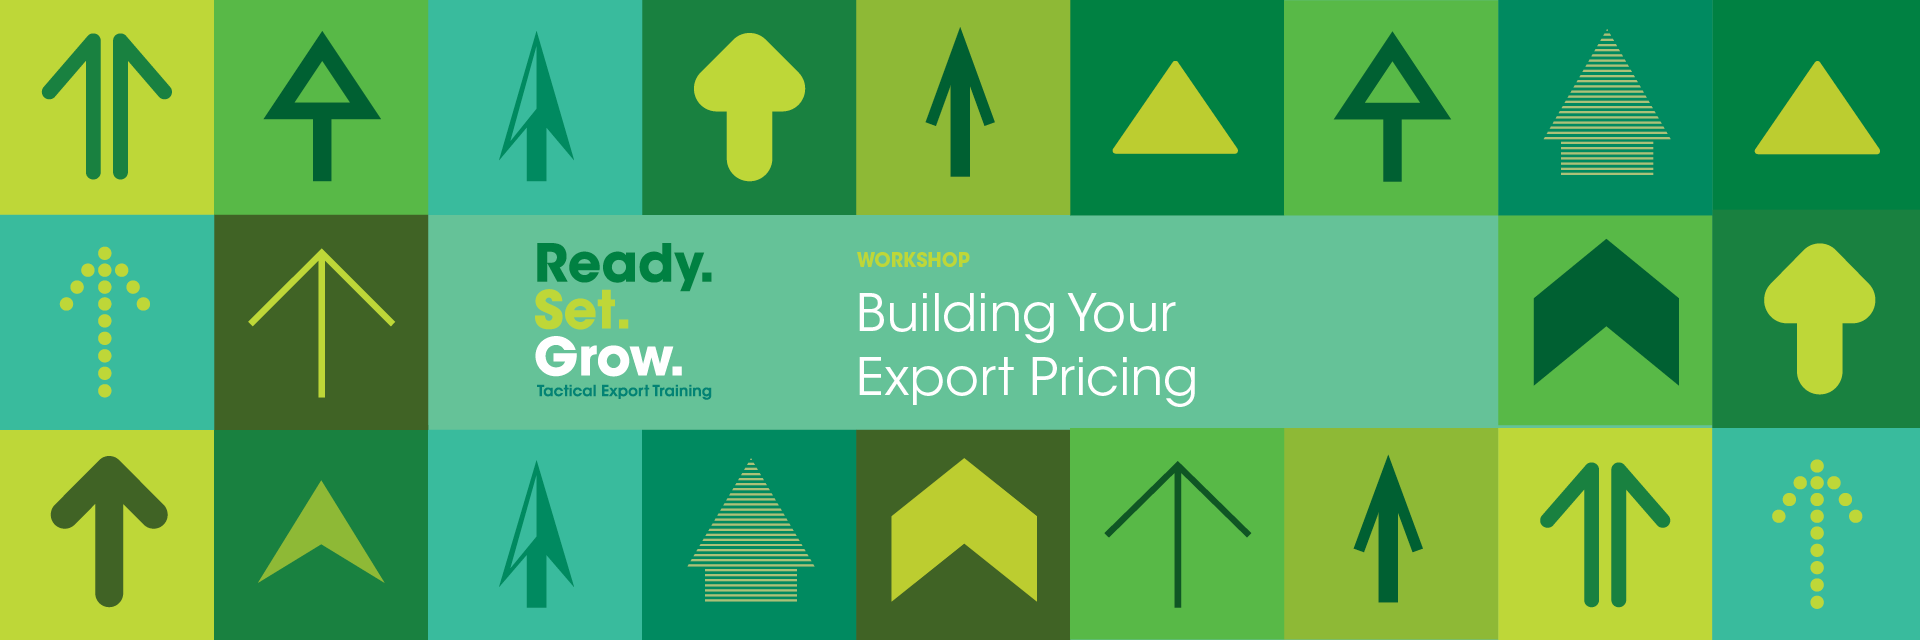 Building your Export Pricing